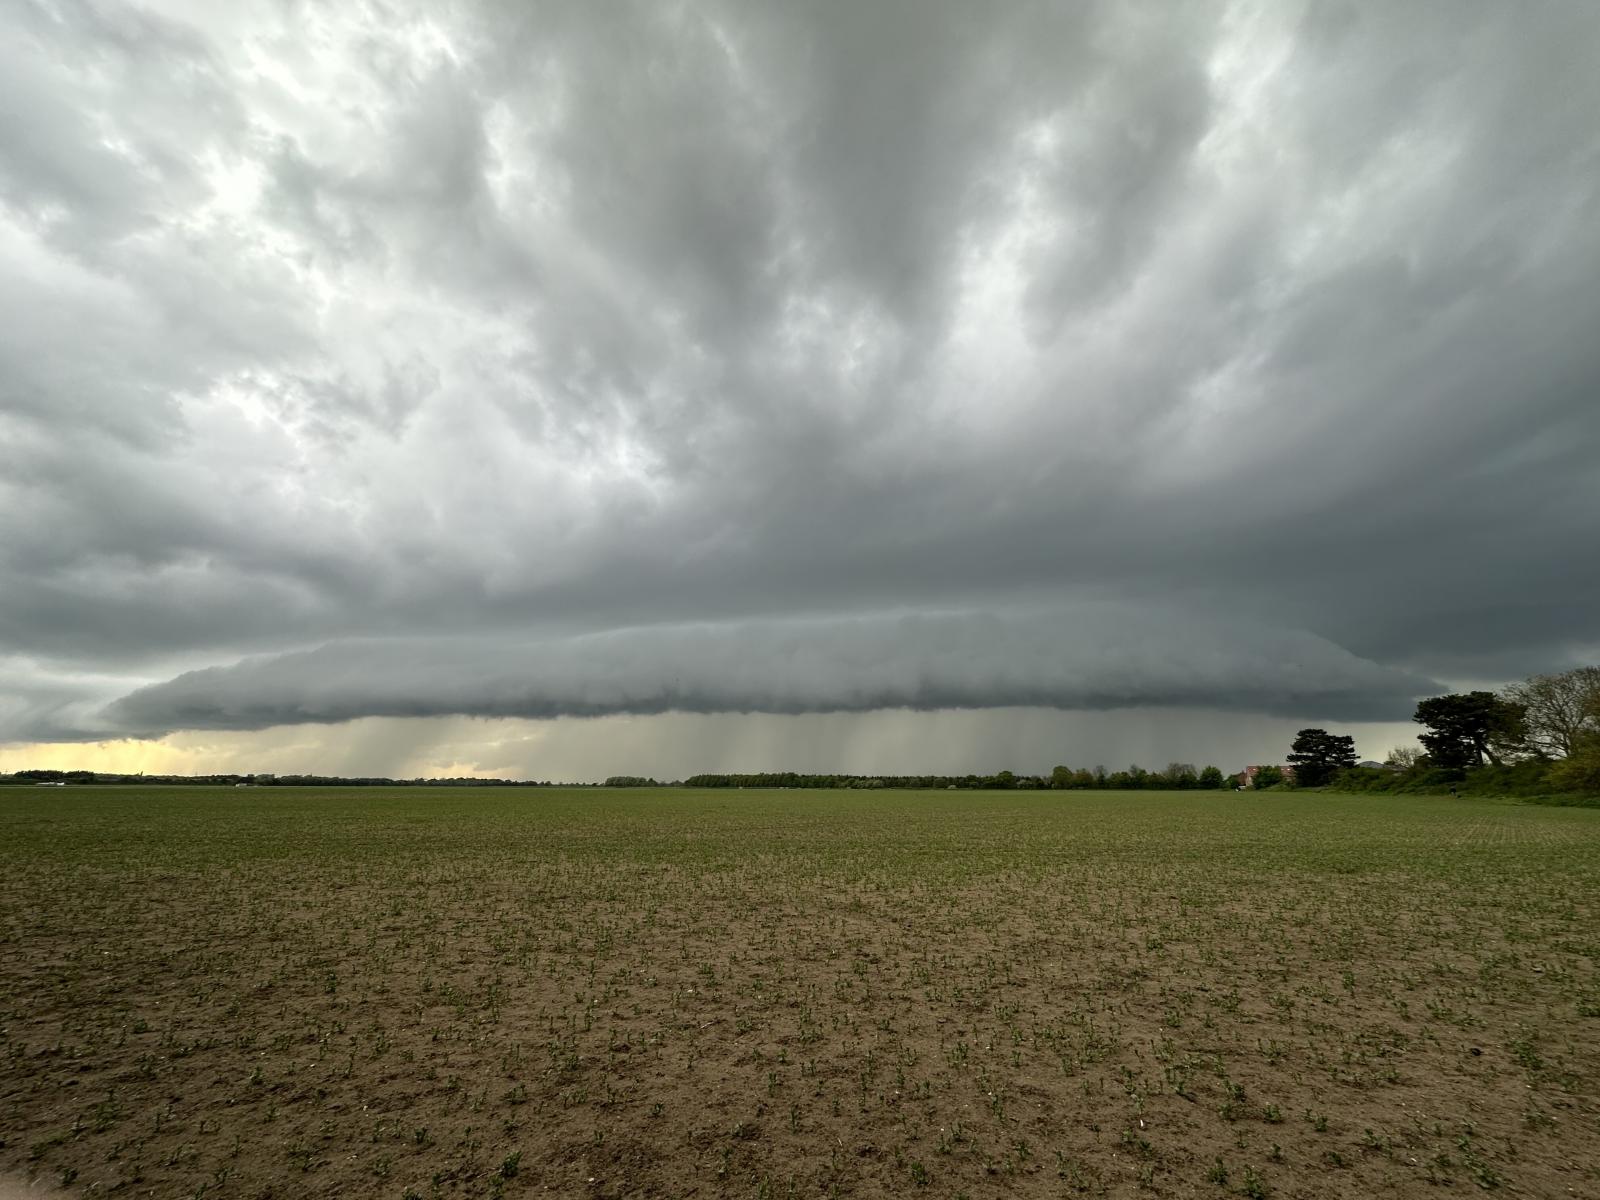 Shelf cloud photo from Tuesday uploaded by Aiden2012 to the Netweather community